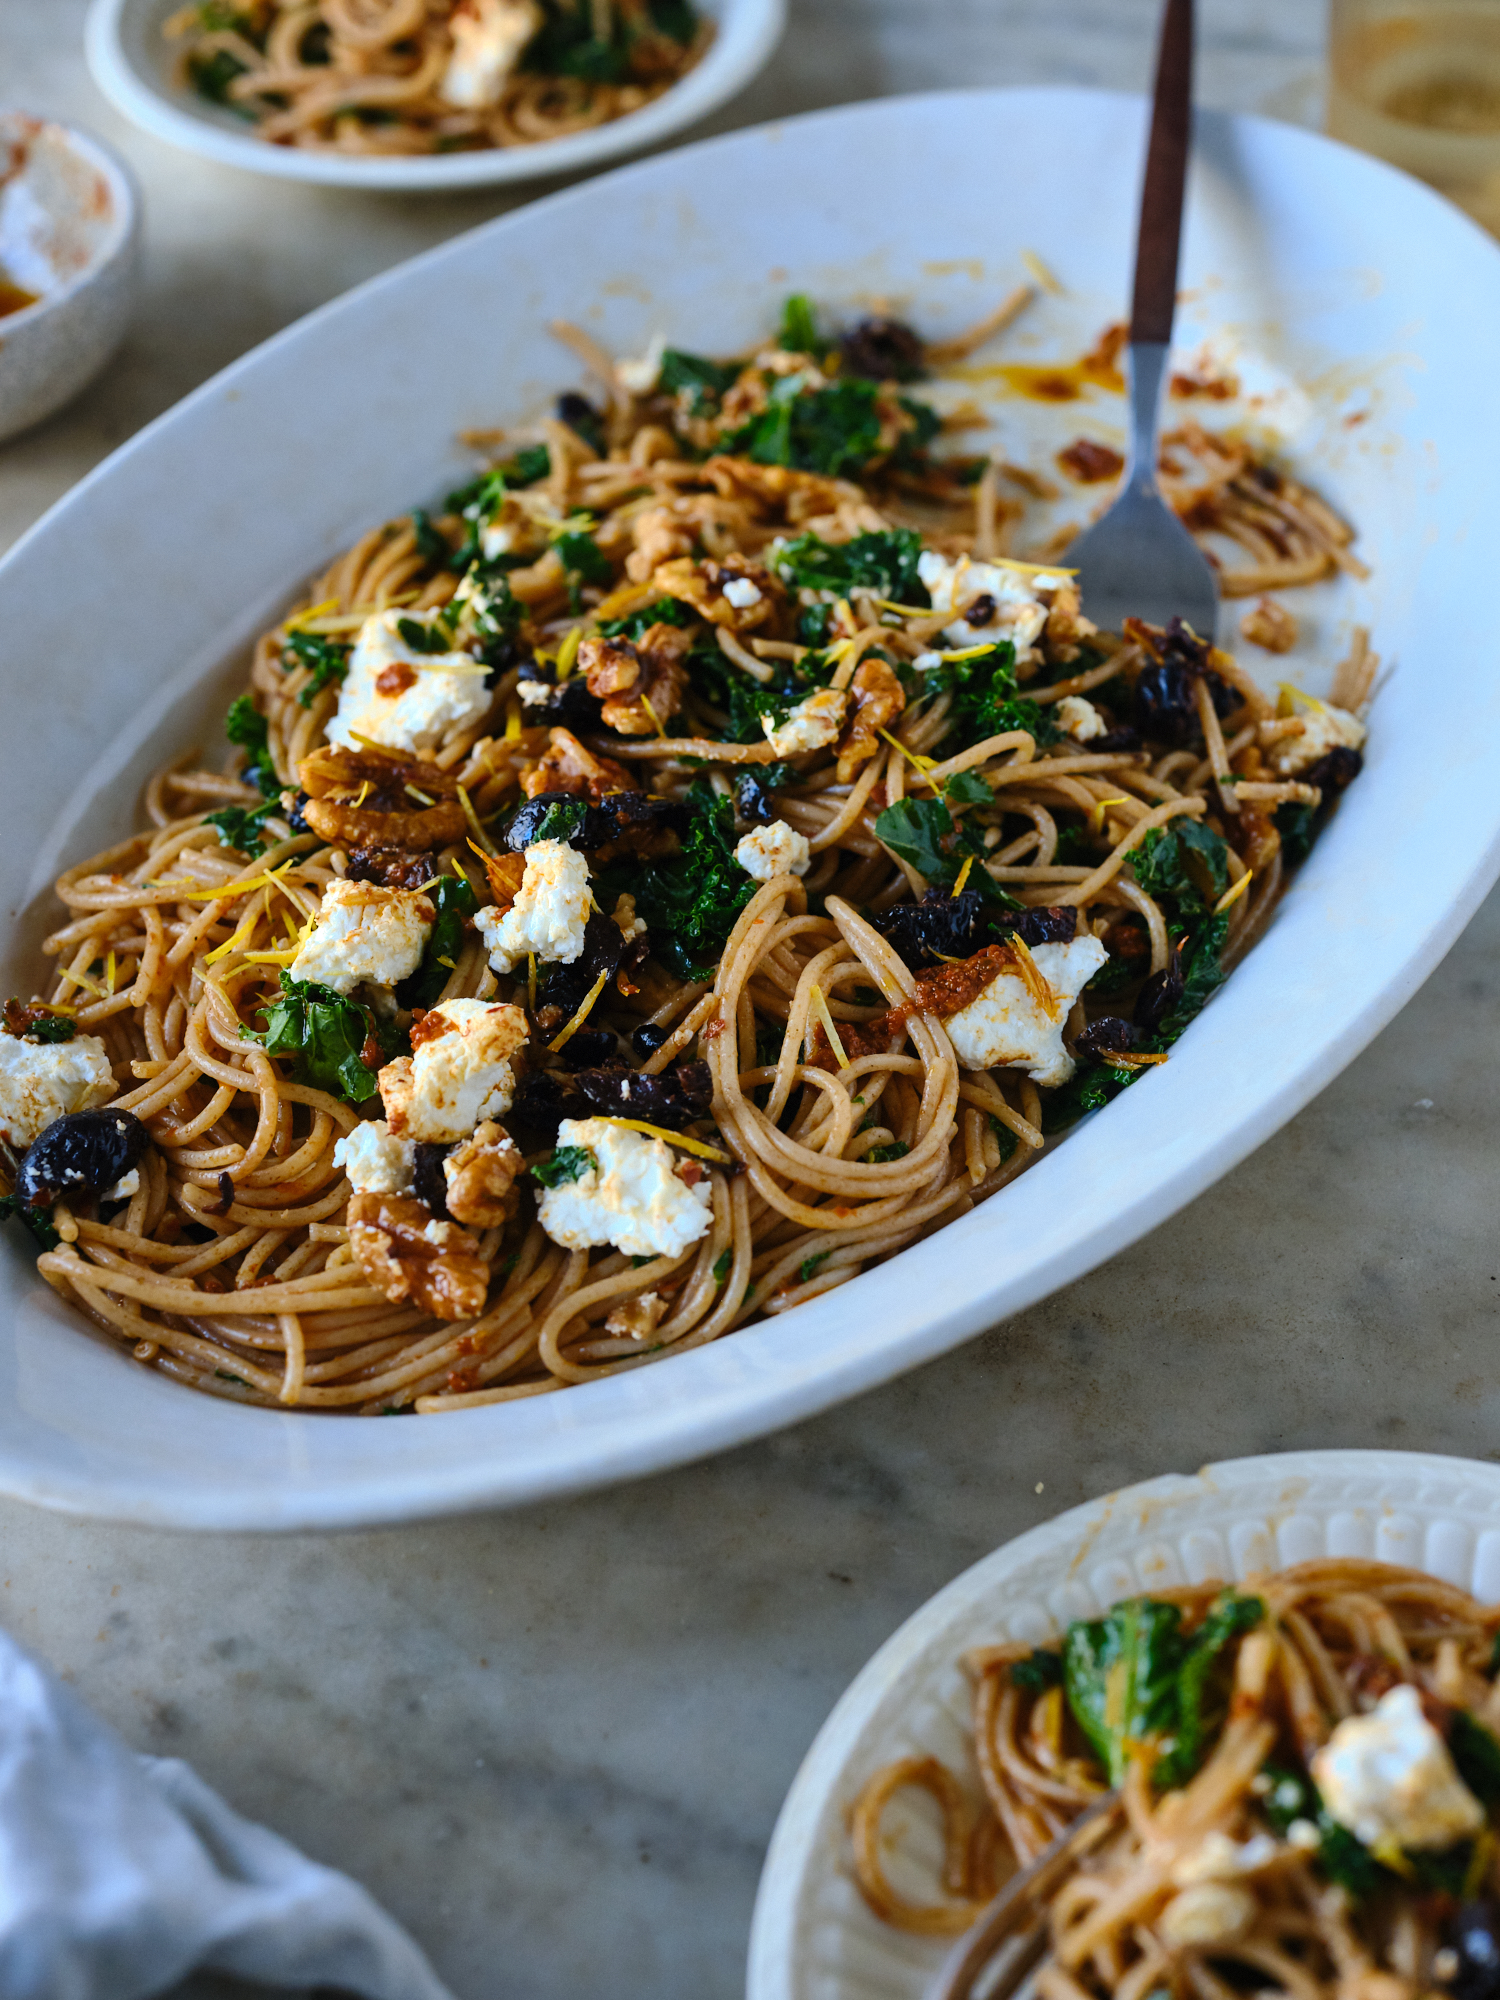 spaghetti dinner tossed with harissa oil, kale, and walnuts on a table being served